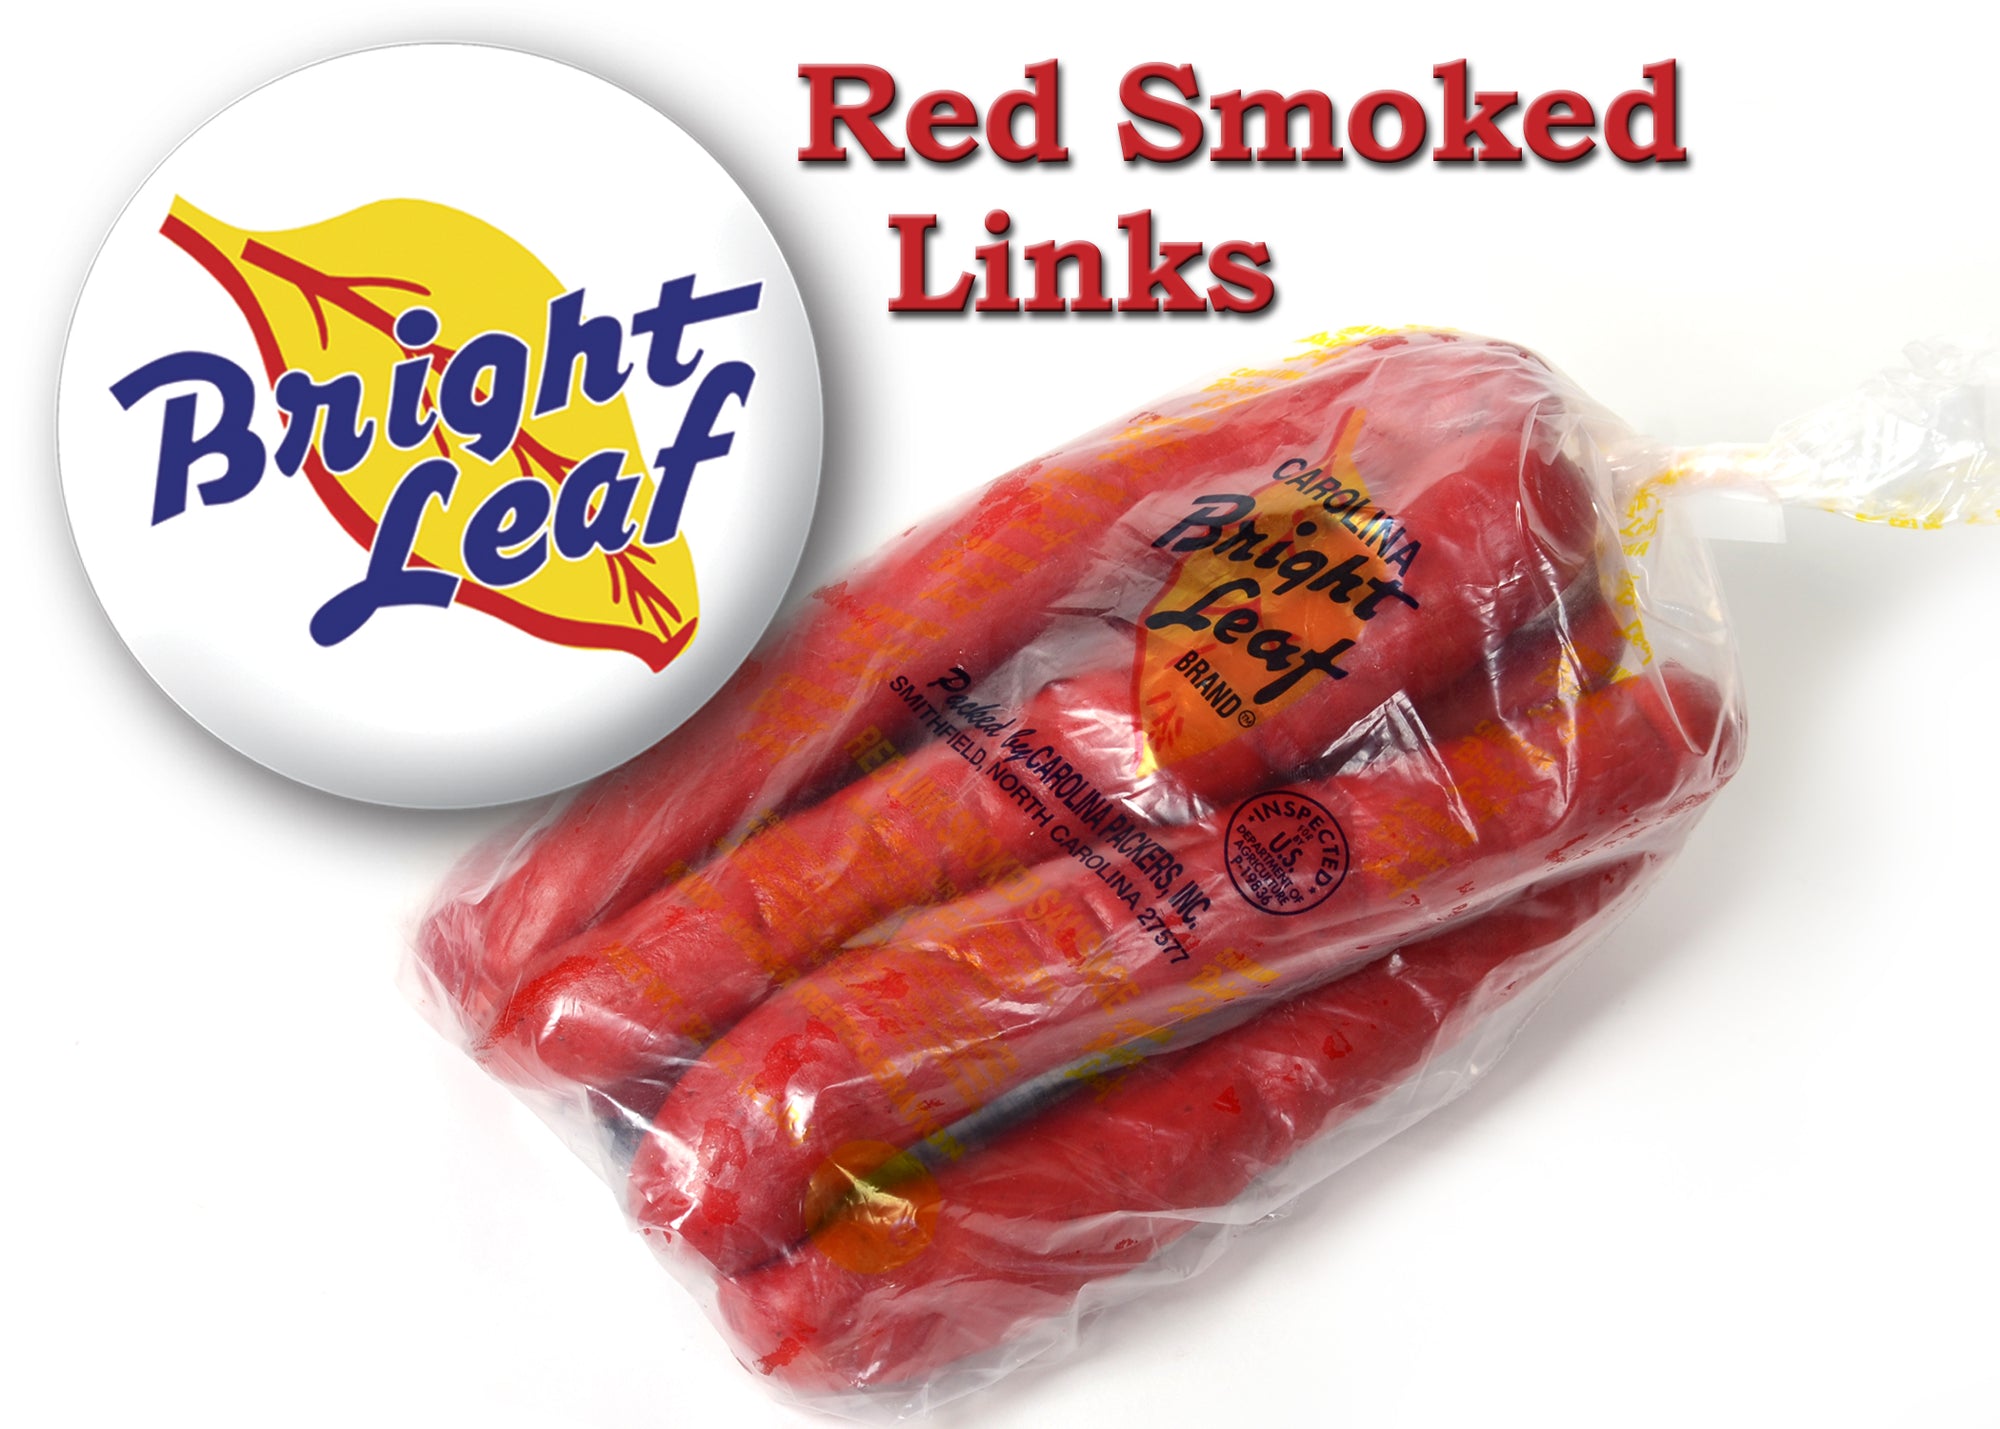 Bright Leaf Red Smoked Sausage (3 - 2 lb Packages)